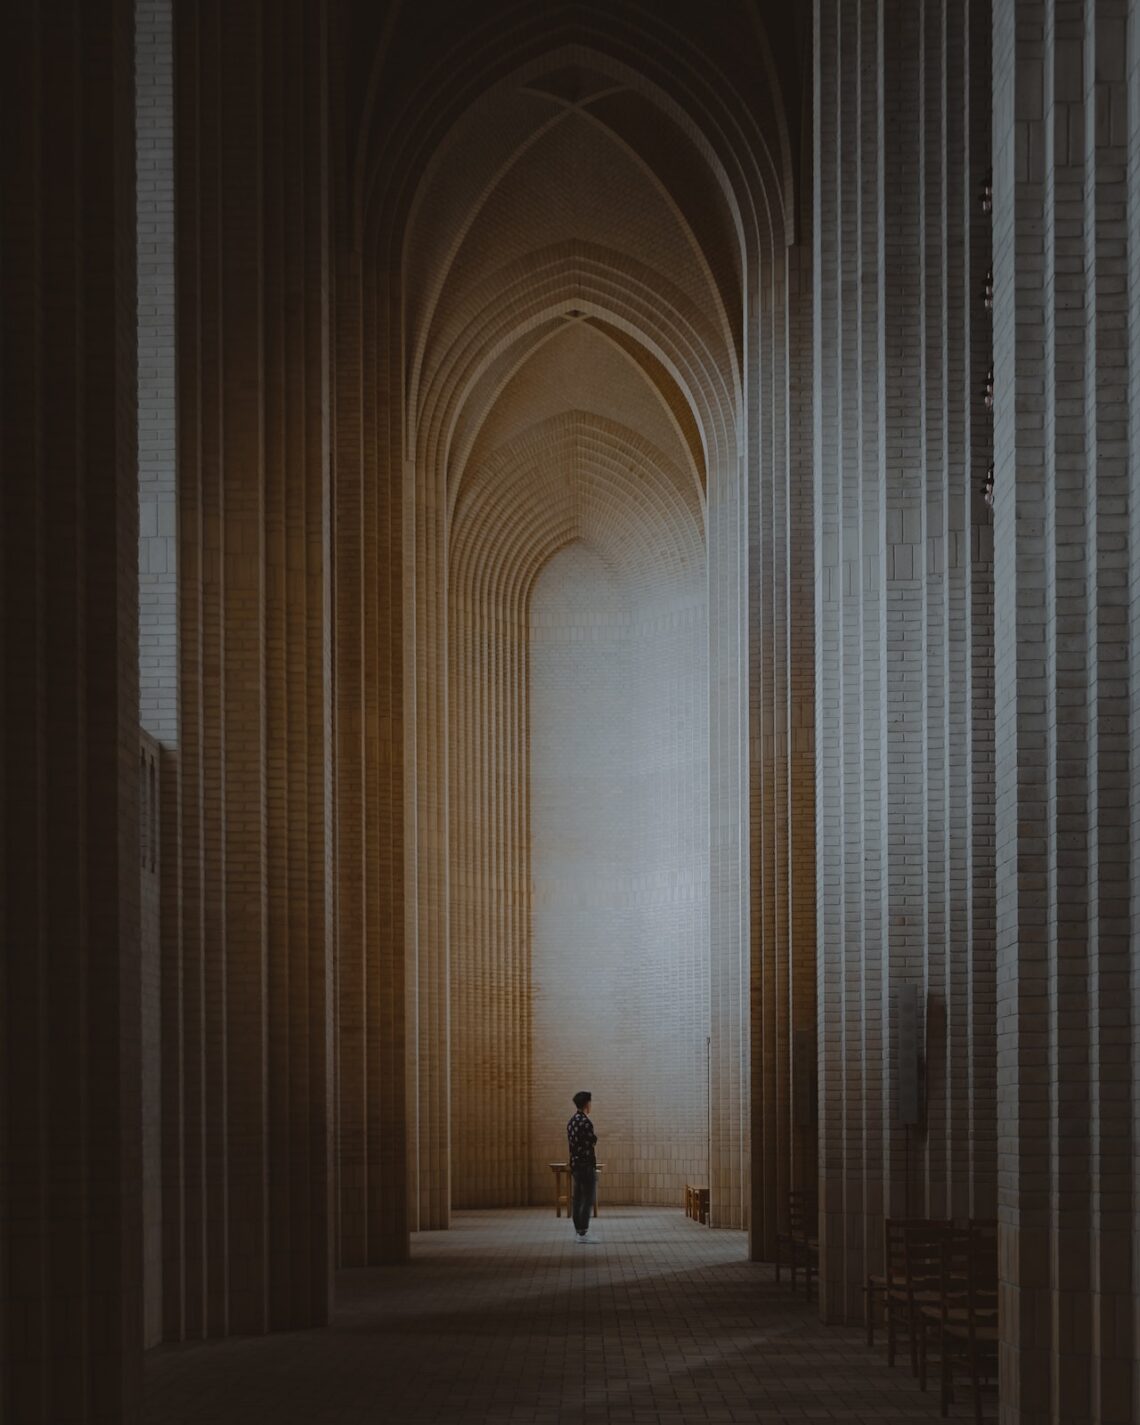 A person situated within a tall and narrow theological archway.